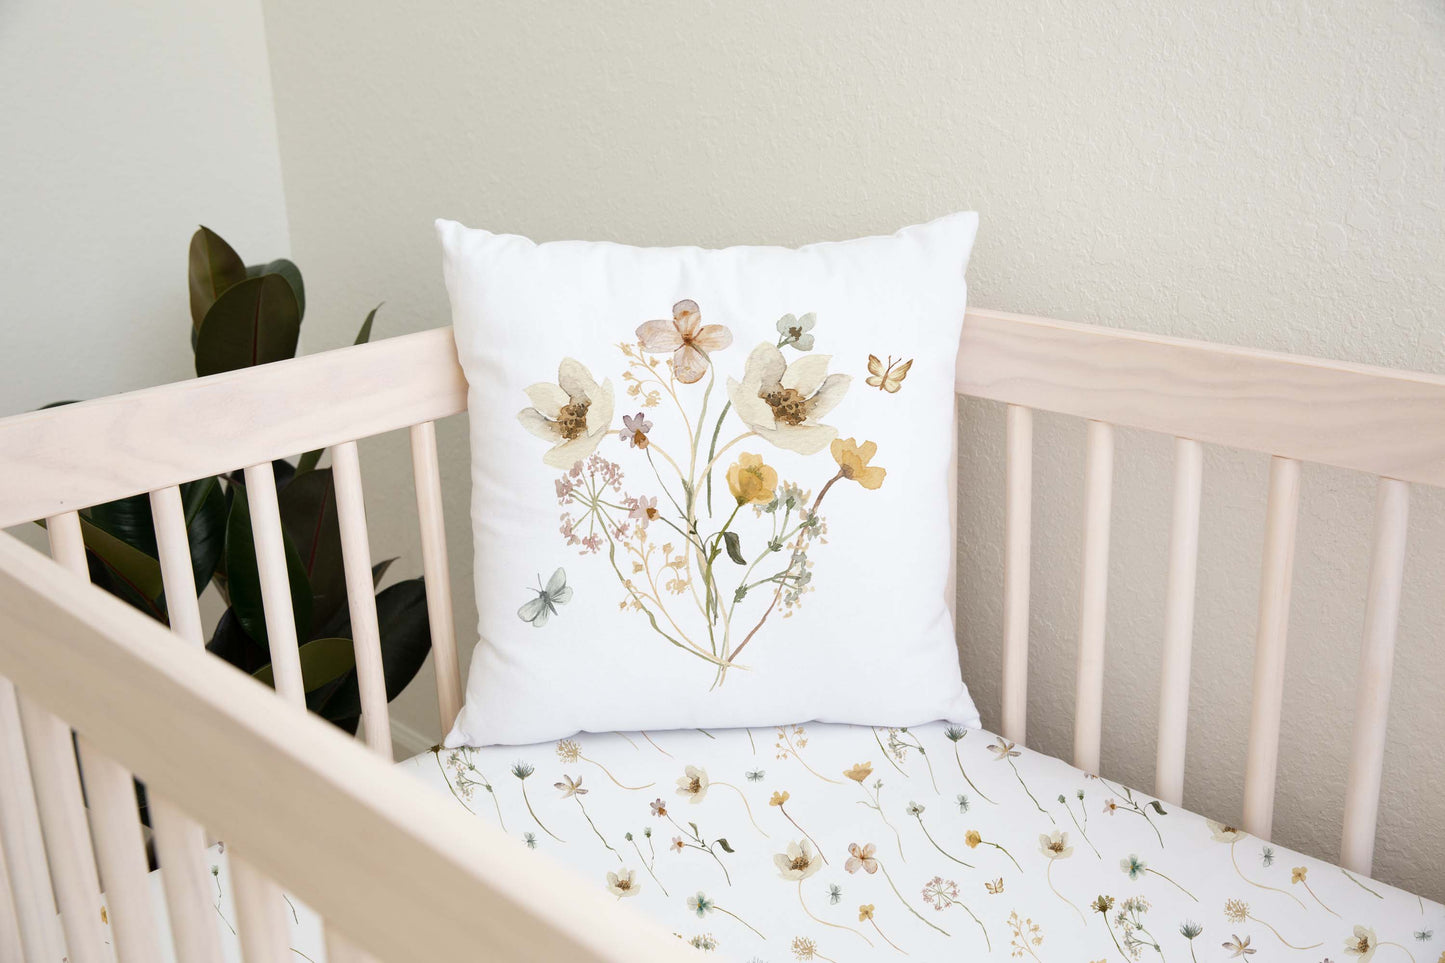 Wild flowers pillow, Floral pillow cover - Mustard Wildflowers